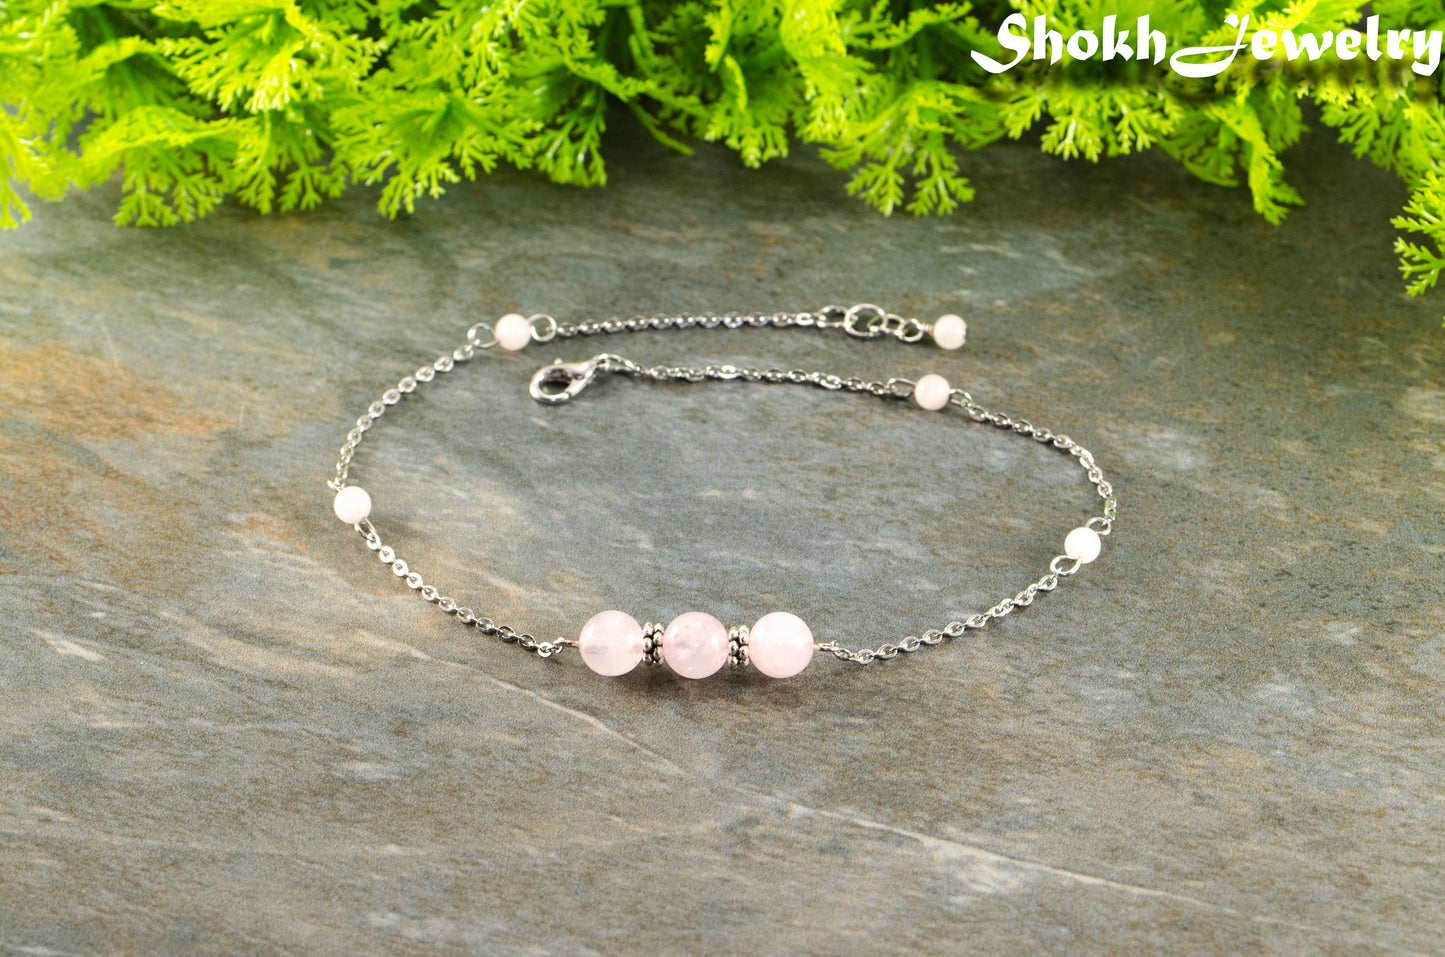 Natural Rose Quartz and Chain Choker Necklace for women.